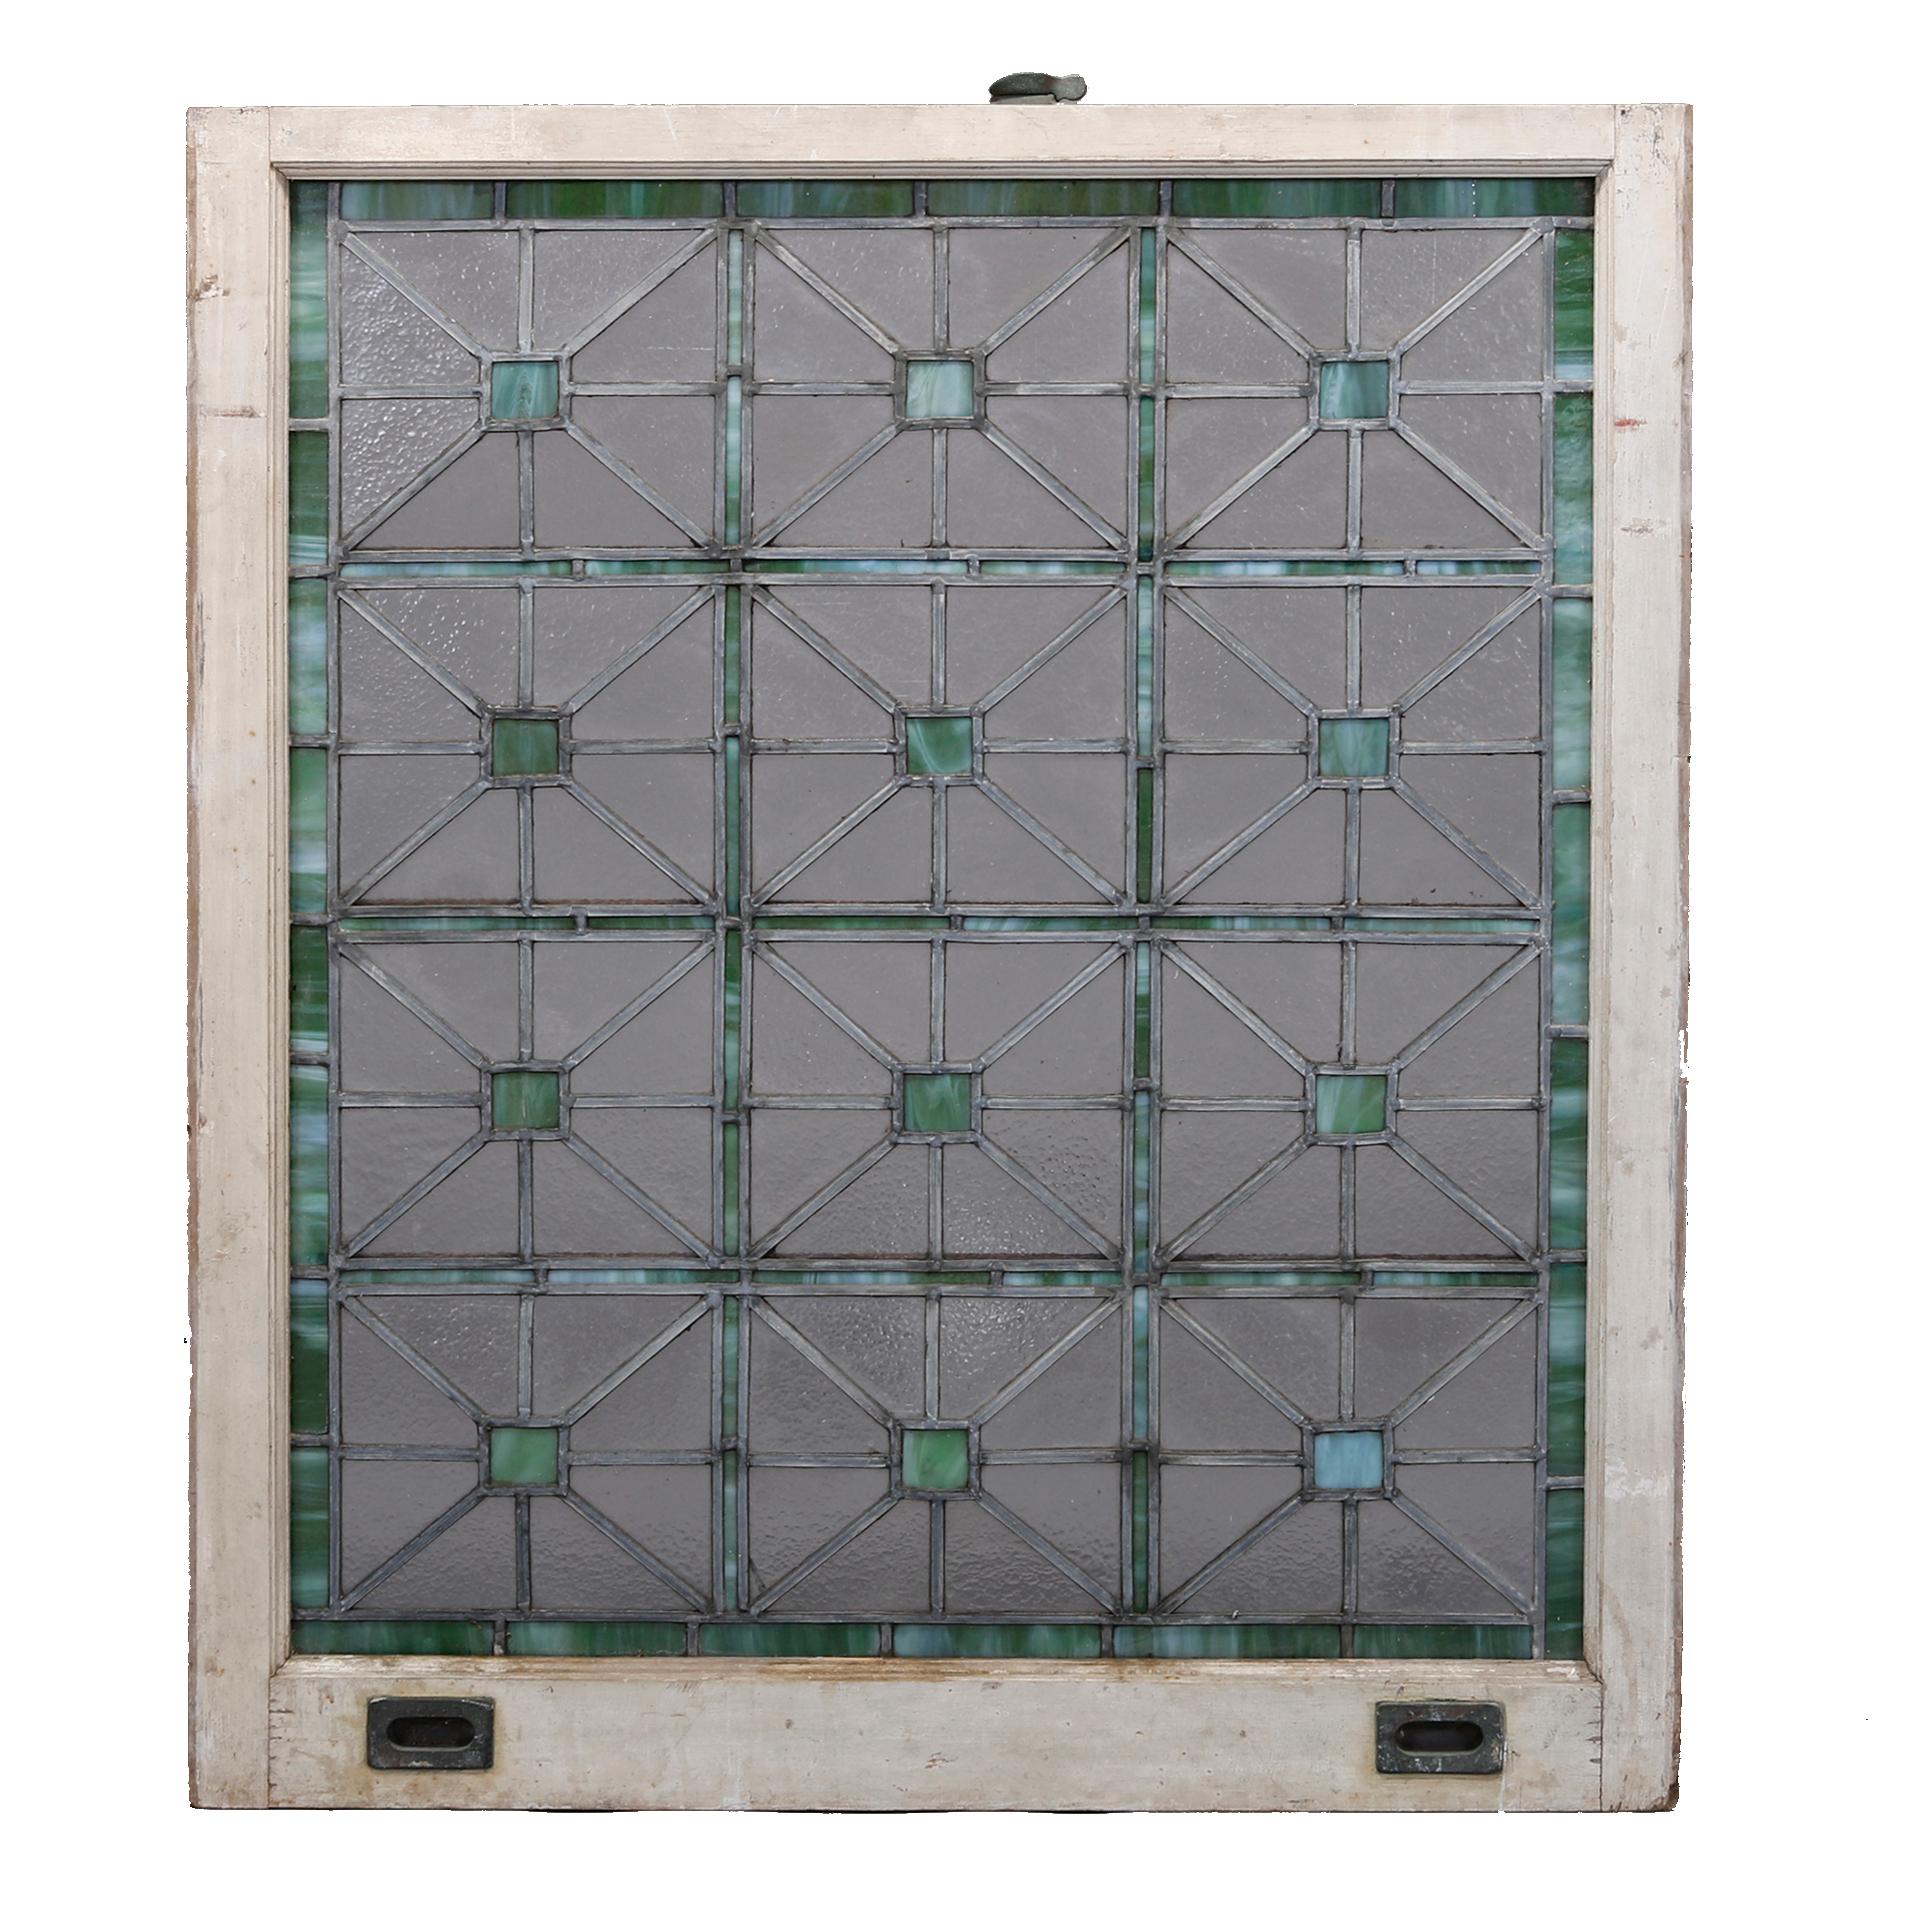 An antique Arts and Crafts Frank Lloyd Wright style Prairie School leaded slag and modeled glass window offers repeating pattern on geometric panels in emerald green and colorless glass, c1910.

Measures: 41.5